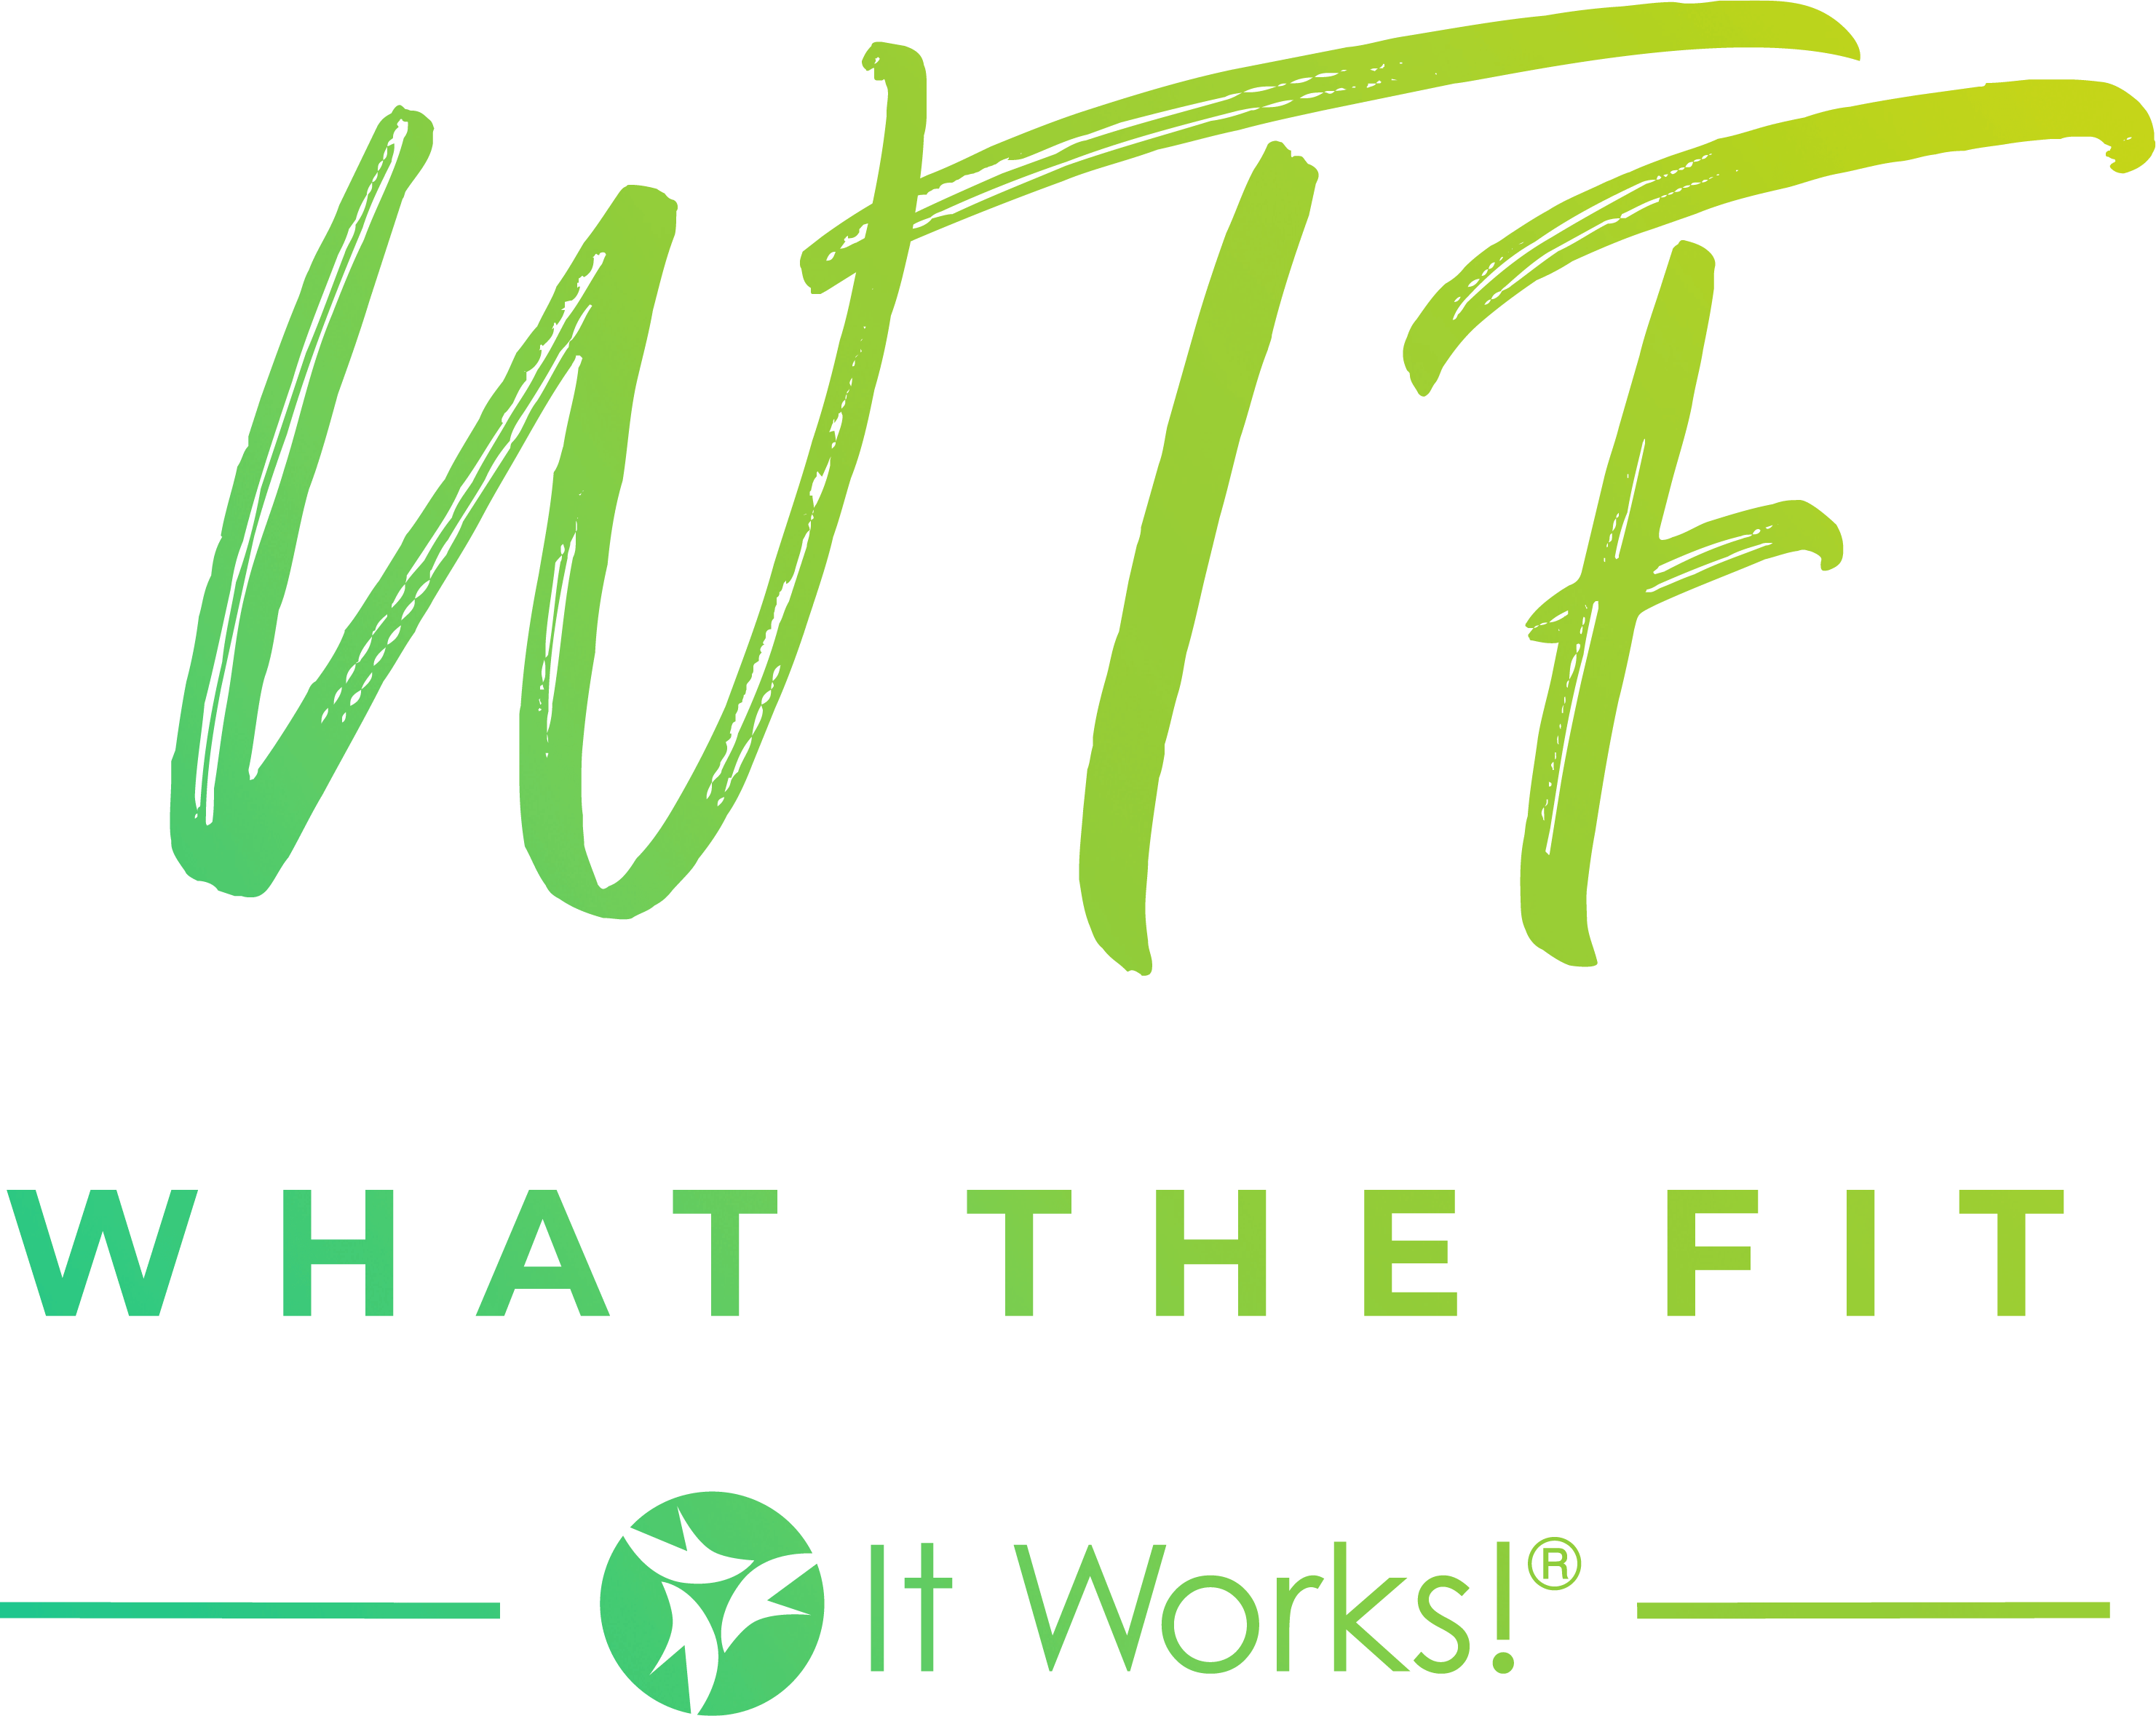 ItWorks Logo - What The Fit?. It Works!